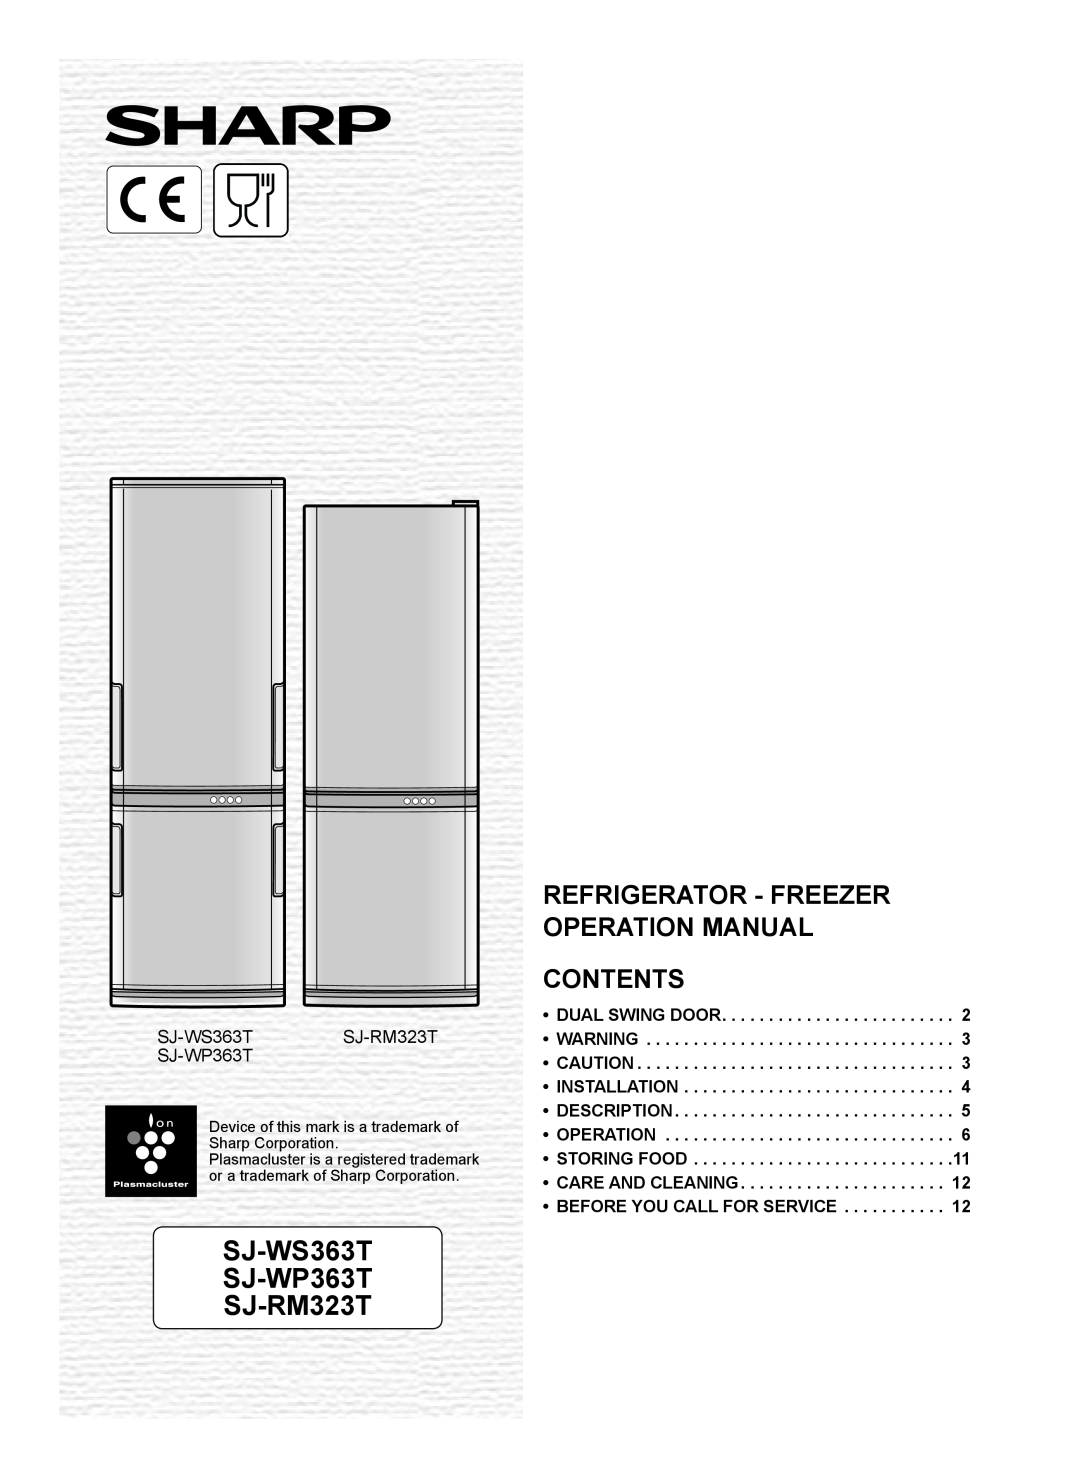 Sharp SJ-WS363T operation manual Dual Swing Door, Installation Description Operation, Storing Food, Care And Cleaning 